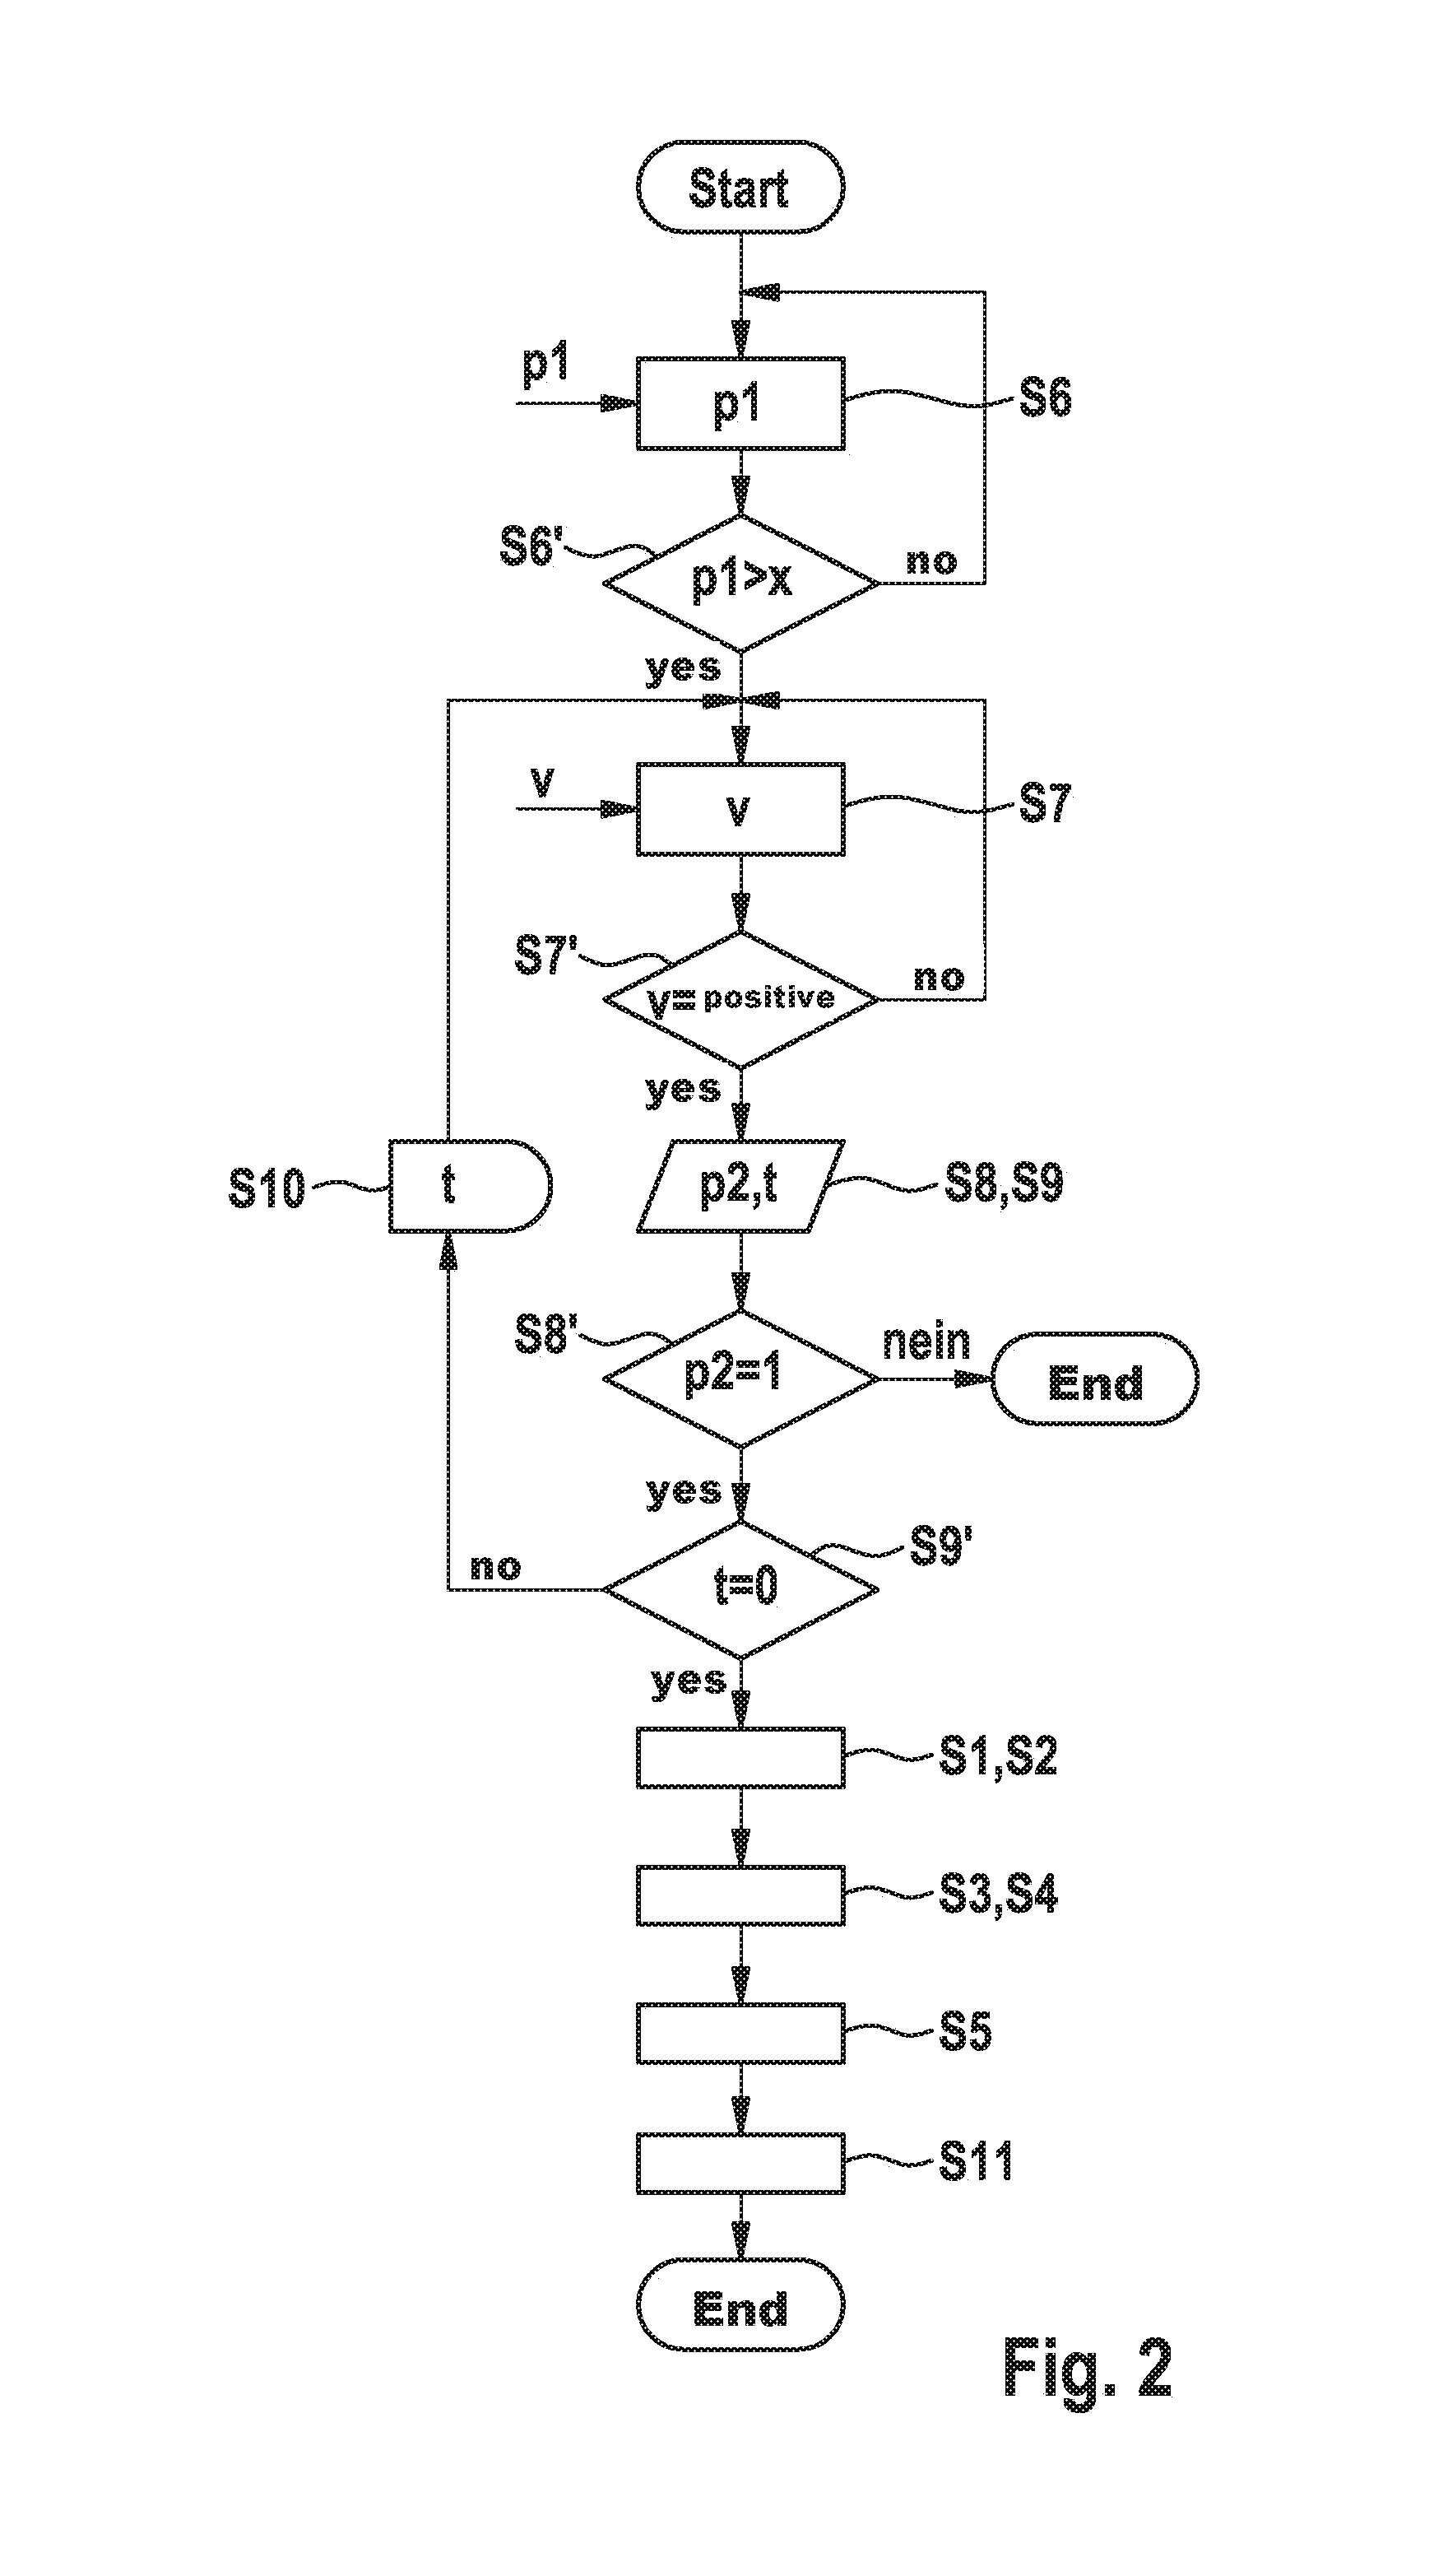 Method and device for determining an open-circuit voltage profile of a vehicle battery, dependent on a state of charge